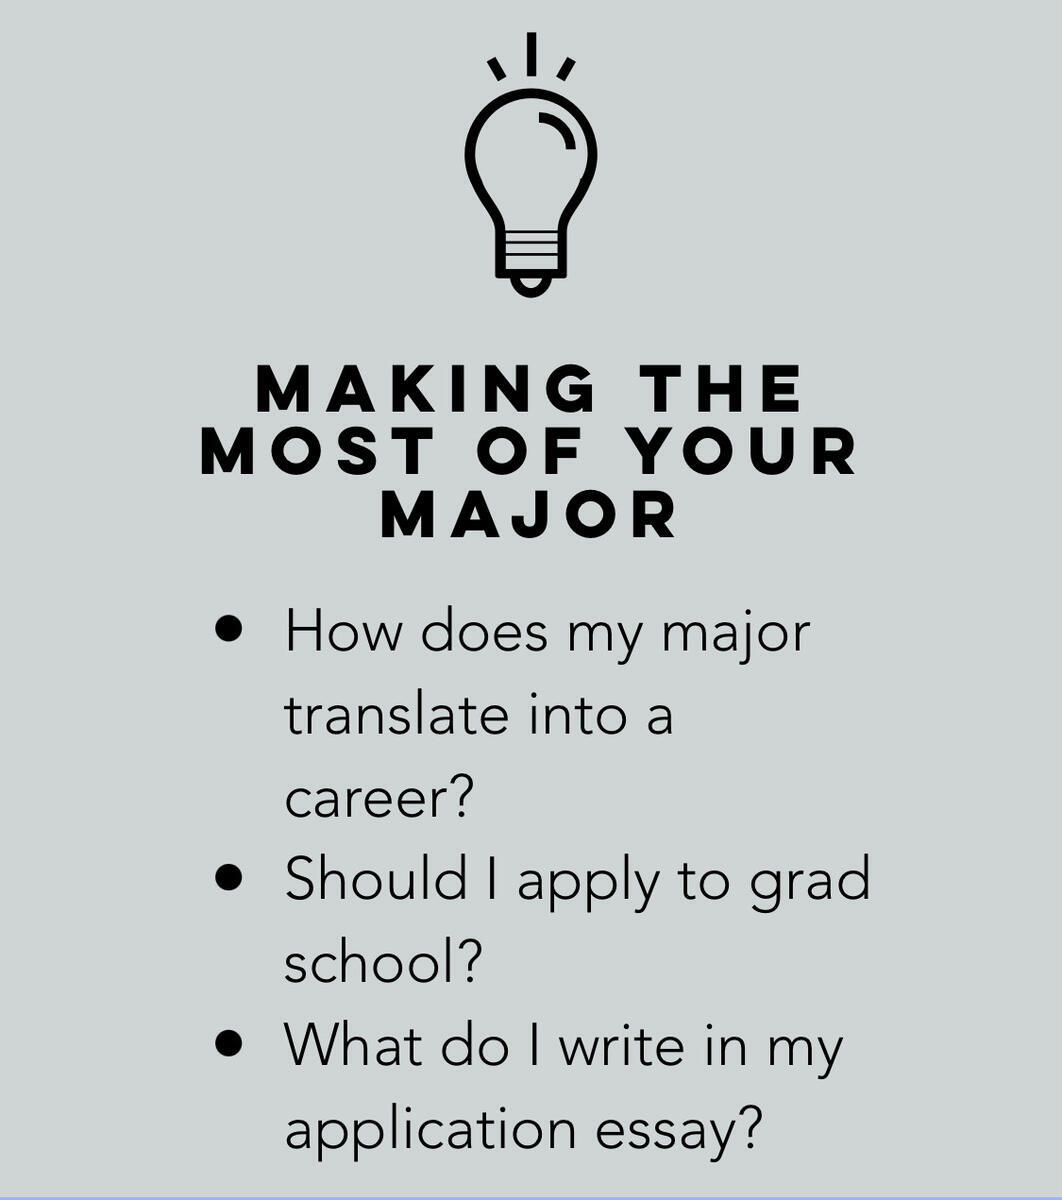 making the most of your major. How does my major translate into a career? Should I apply to grad school? What do I write in my application essay?